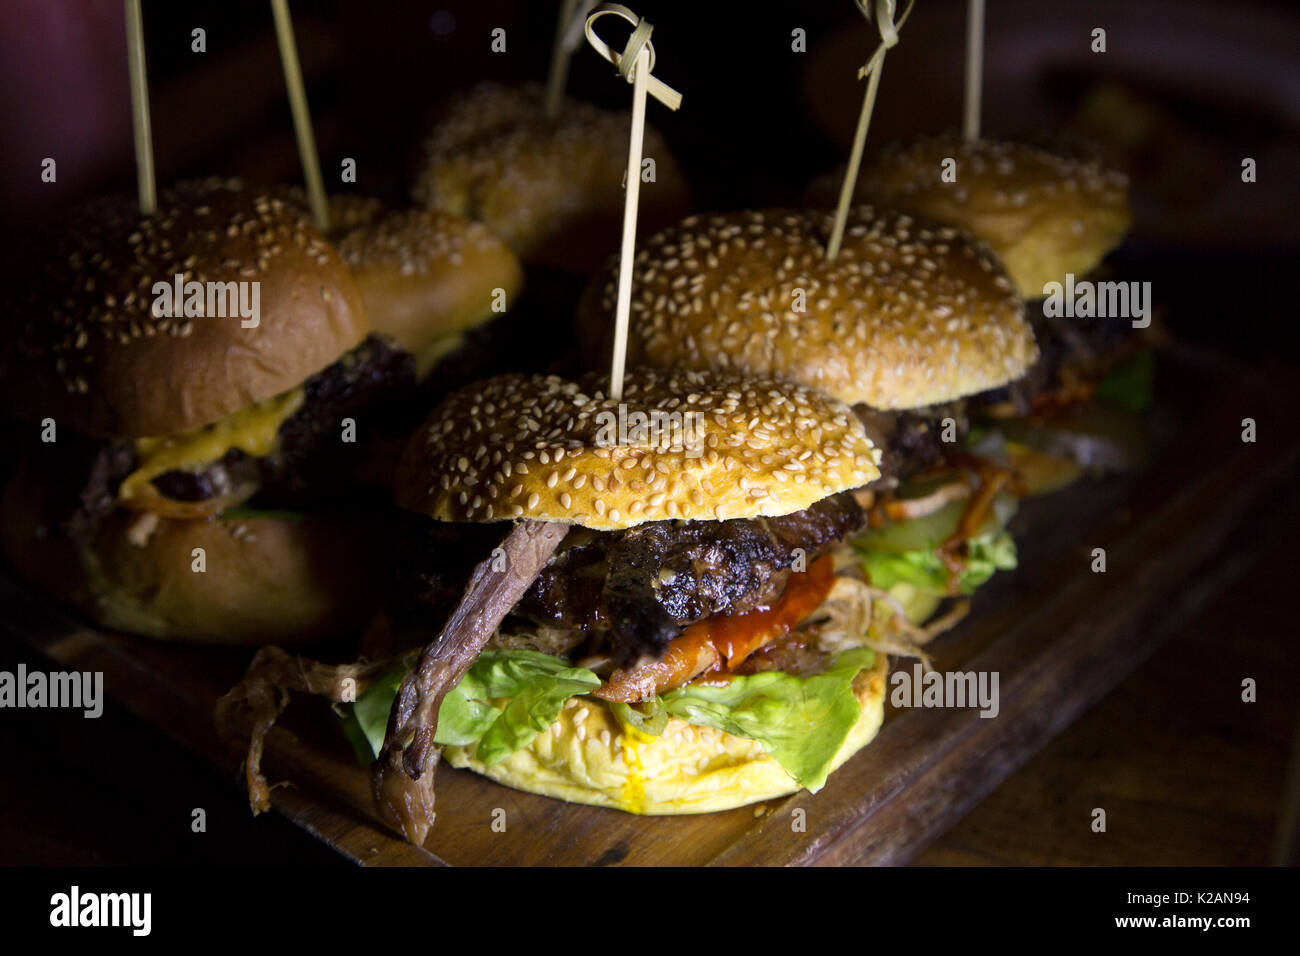 Gourmet burgers served on a wooden board in Sunderland, England. The city hosts the third Sunderland Restaurant Week from 9 to 17 September 2017. Stock Photo